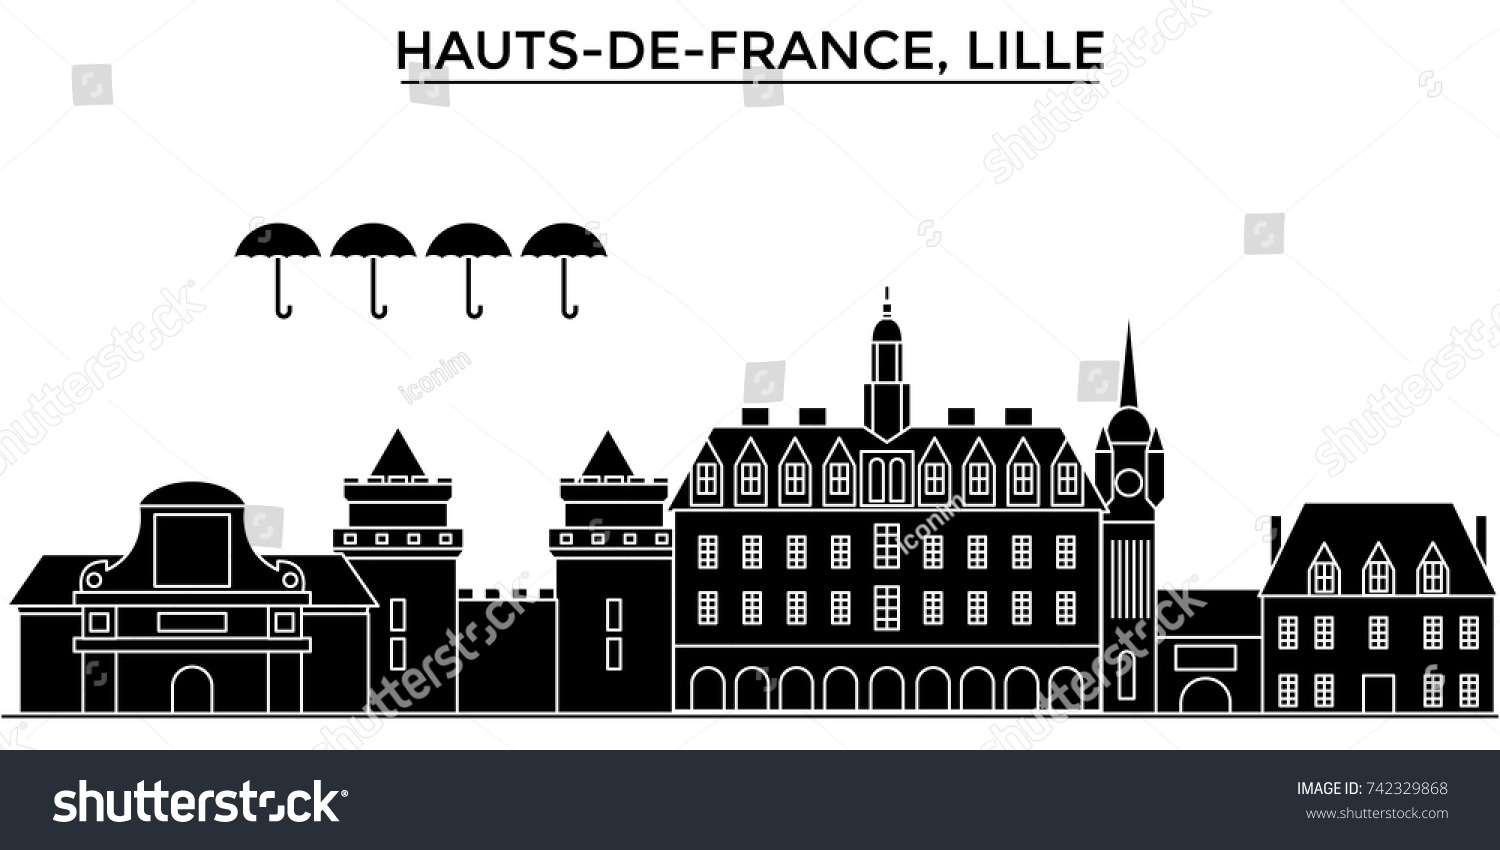 SVG of France, Hauts De France, Lille architecture vector city skyline, travel cityscape with landmarks, buildings, isolated sights on background svg